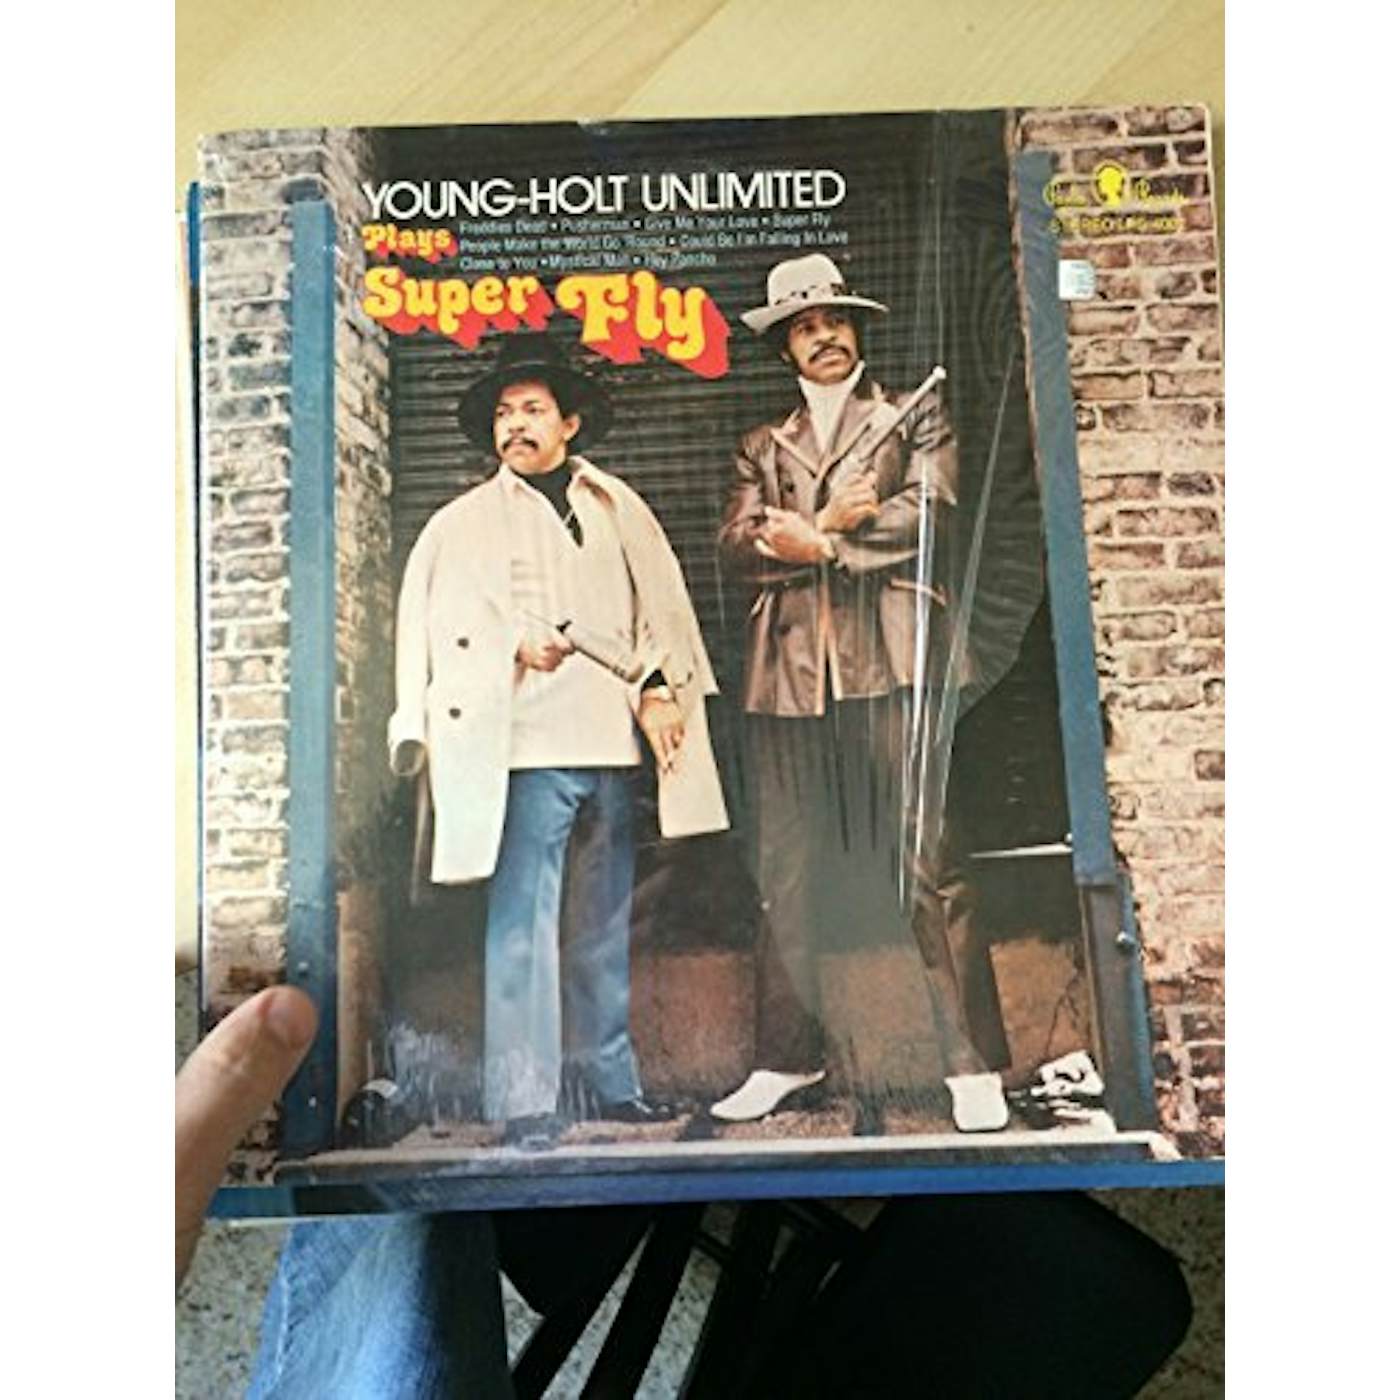 Young-Holt Unlimited PLAYS SUPER FLY Vinyl Record